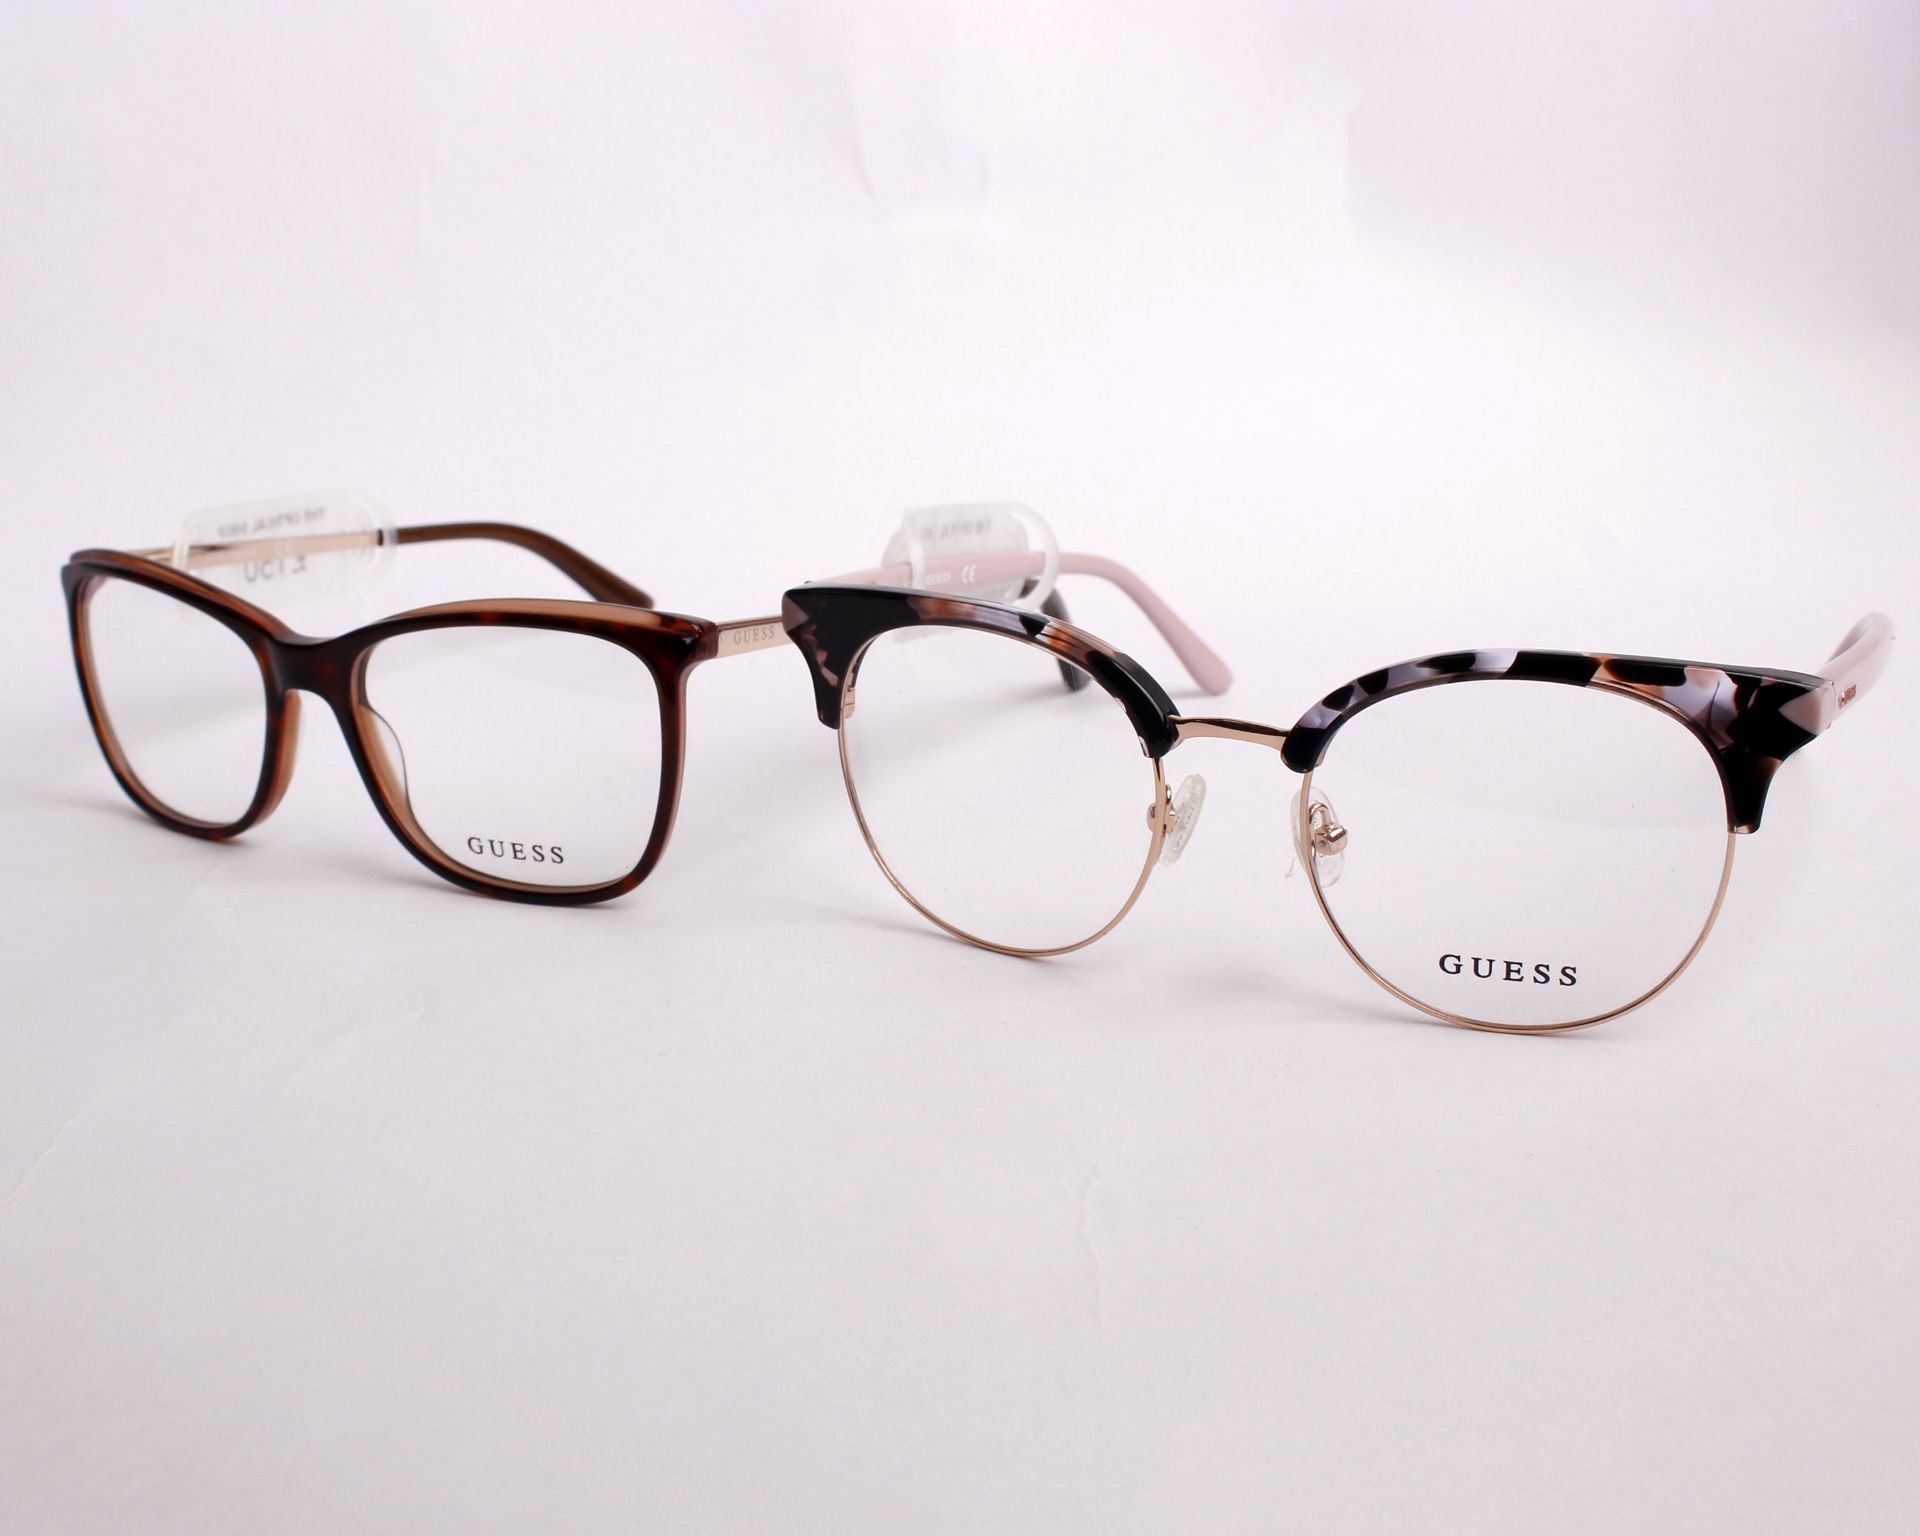 Two pairs of as new Guess glasses frames with clear glass (RRP £150 each).